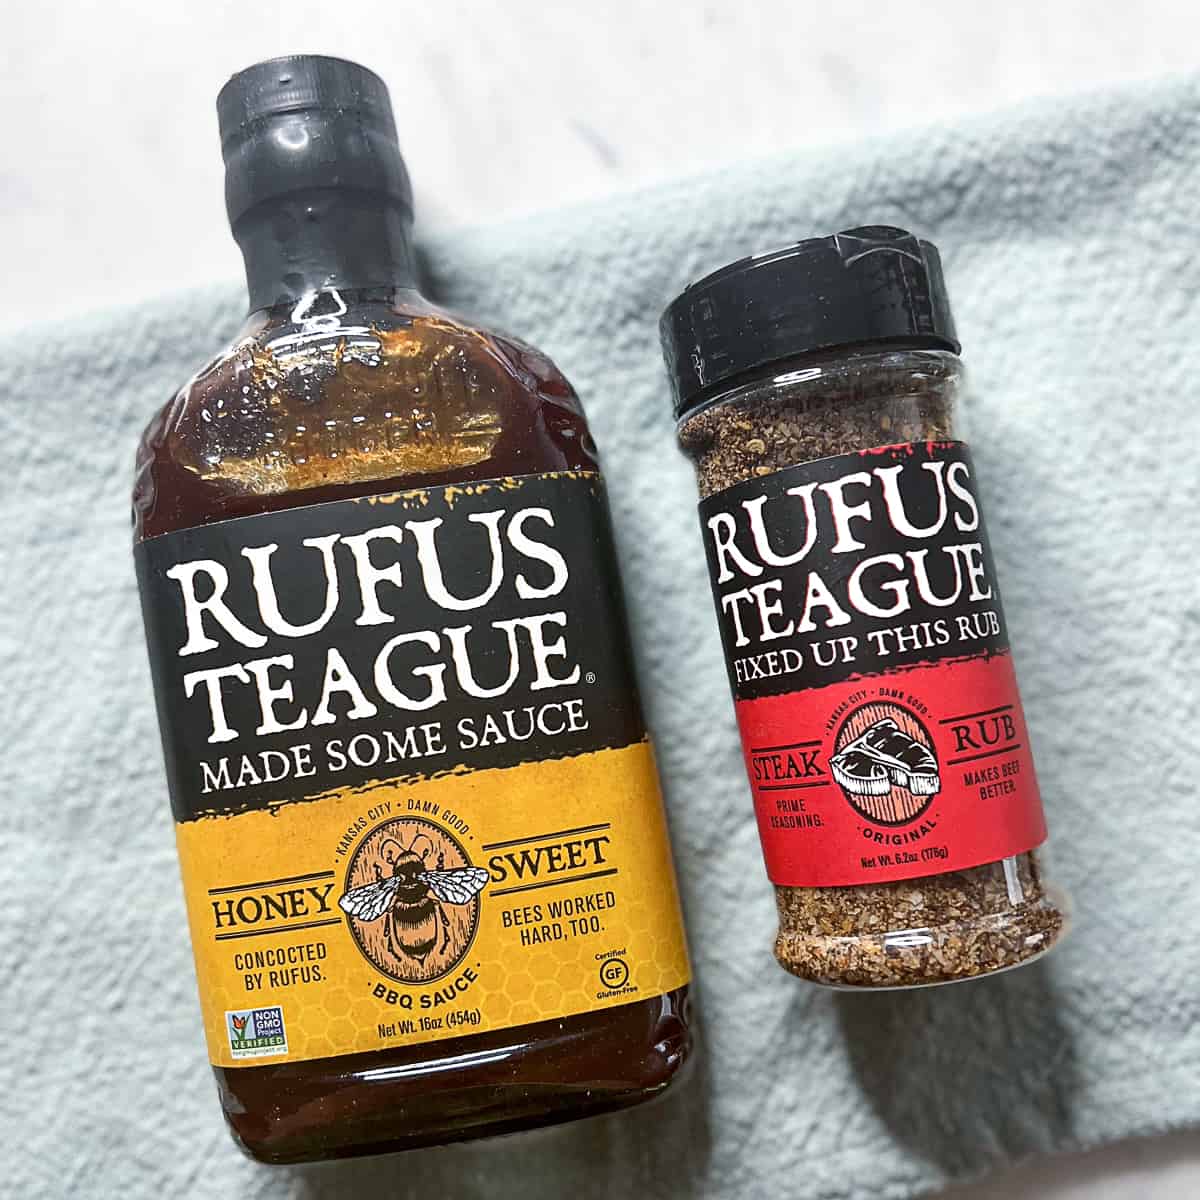 Rufus Teague Honey Sweet BBQ Sauce and Steak Rub for a gift for grill masters